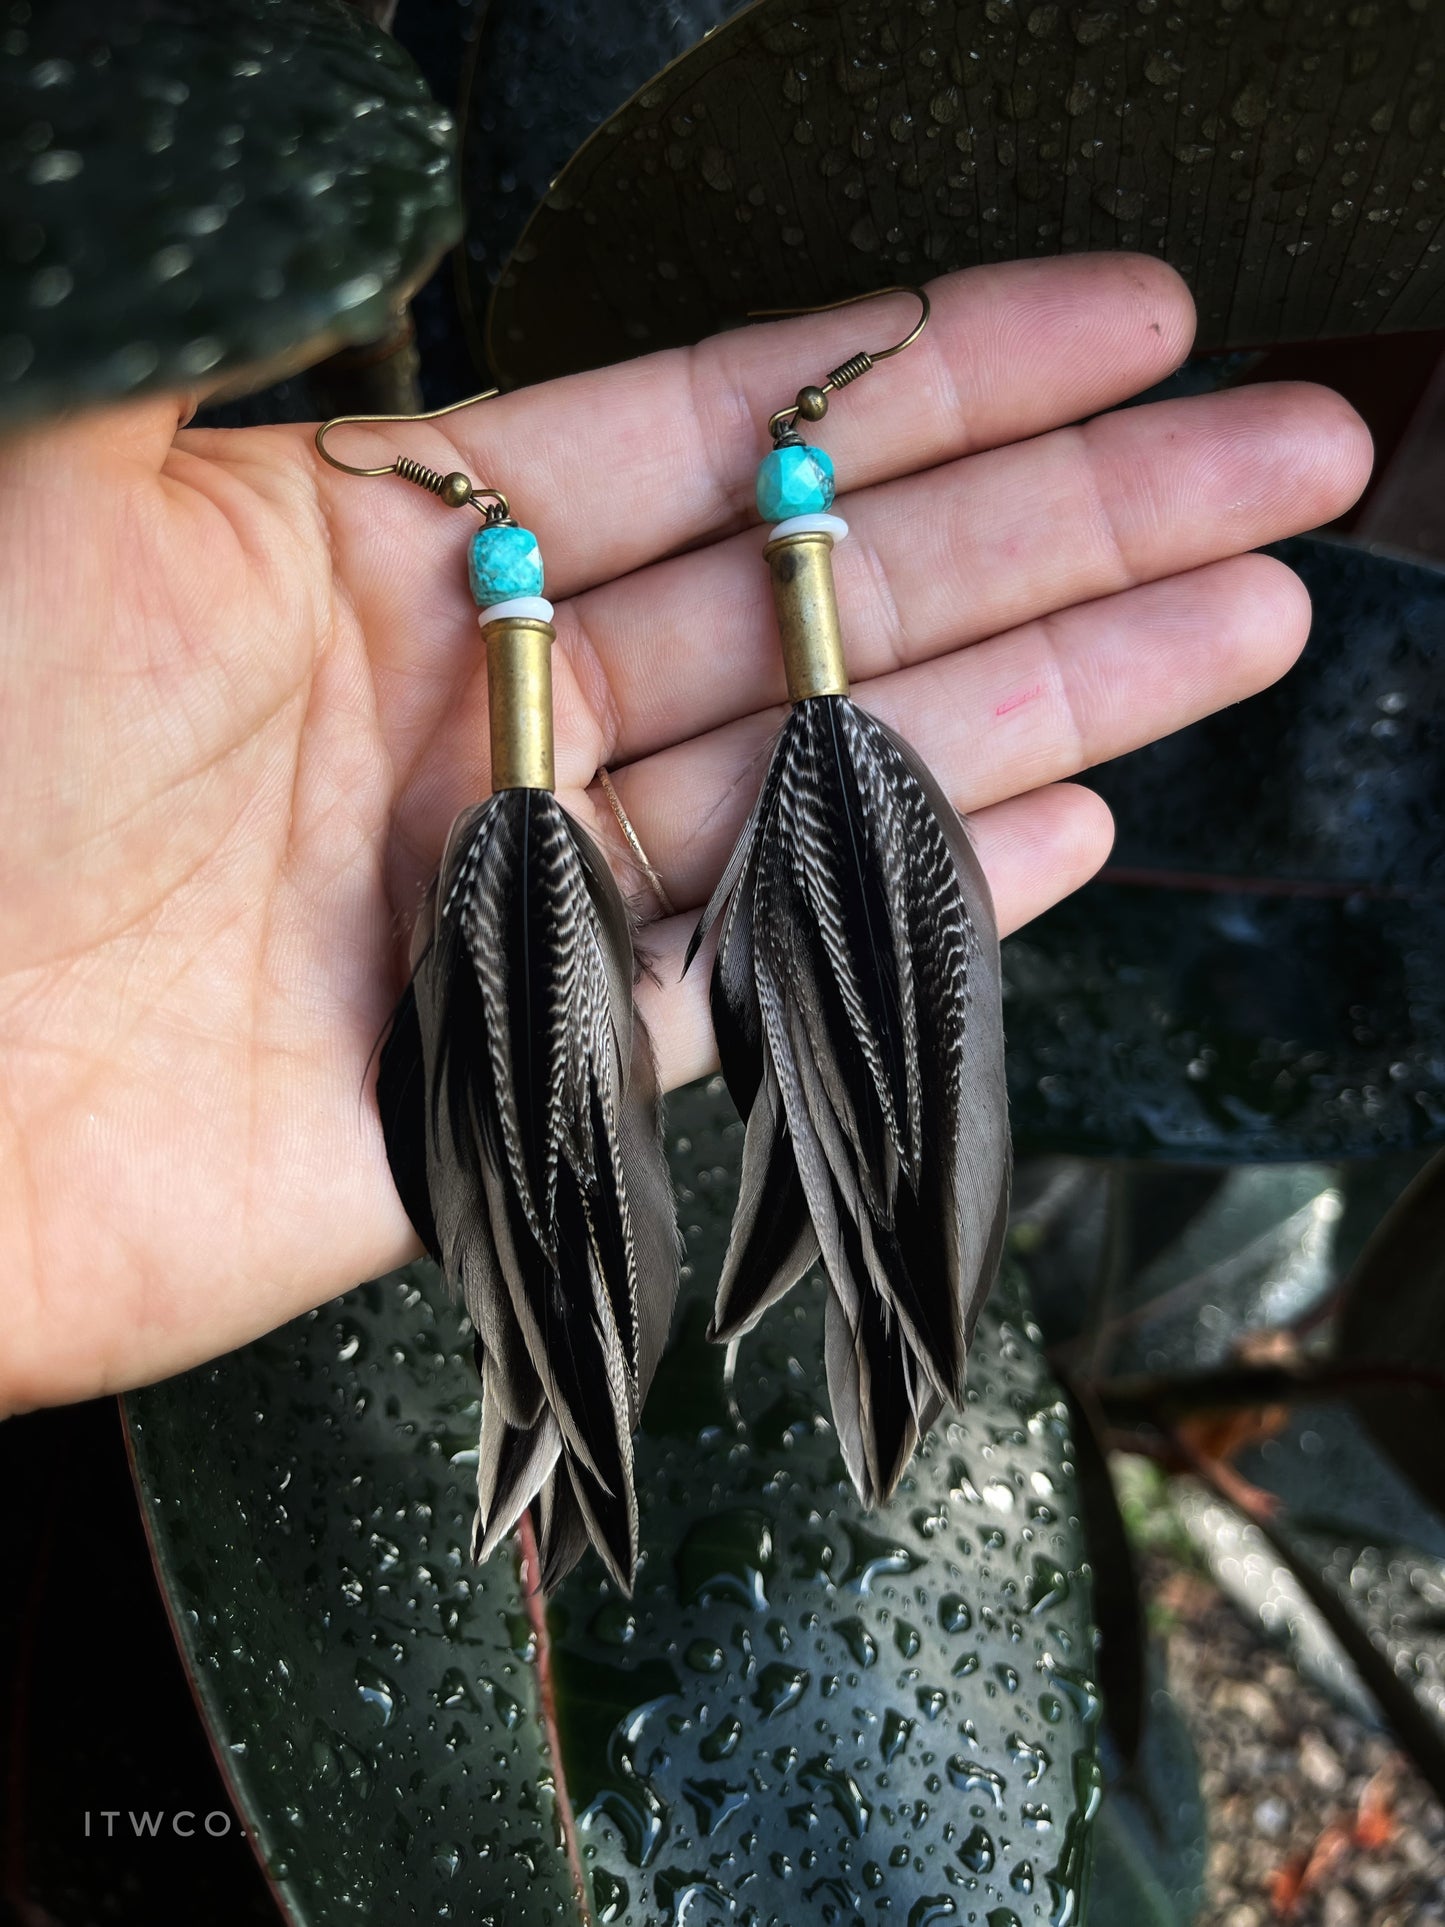 Monthly Feather Earring Subscription